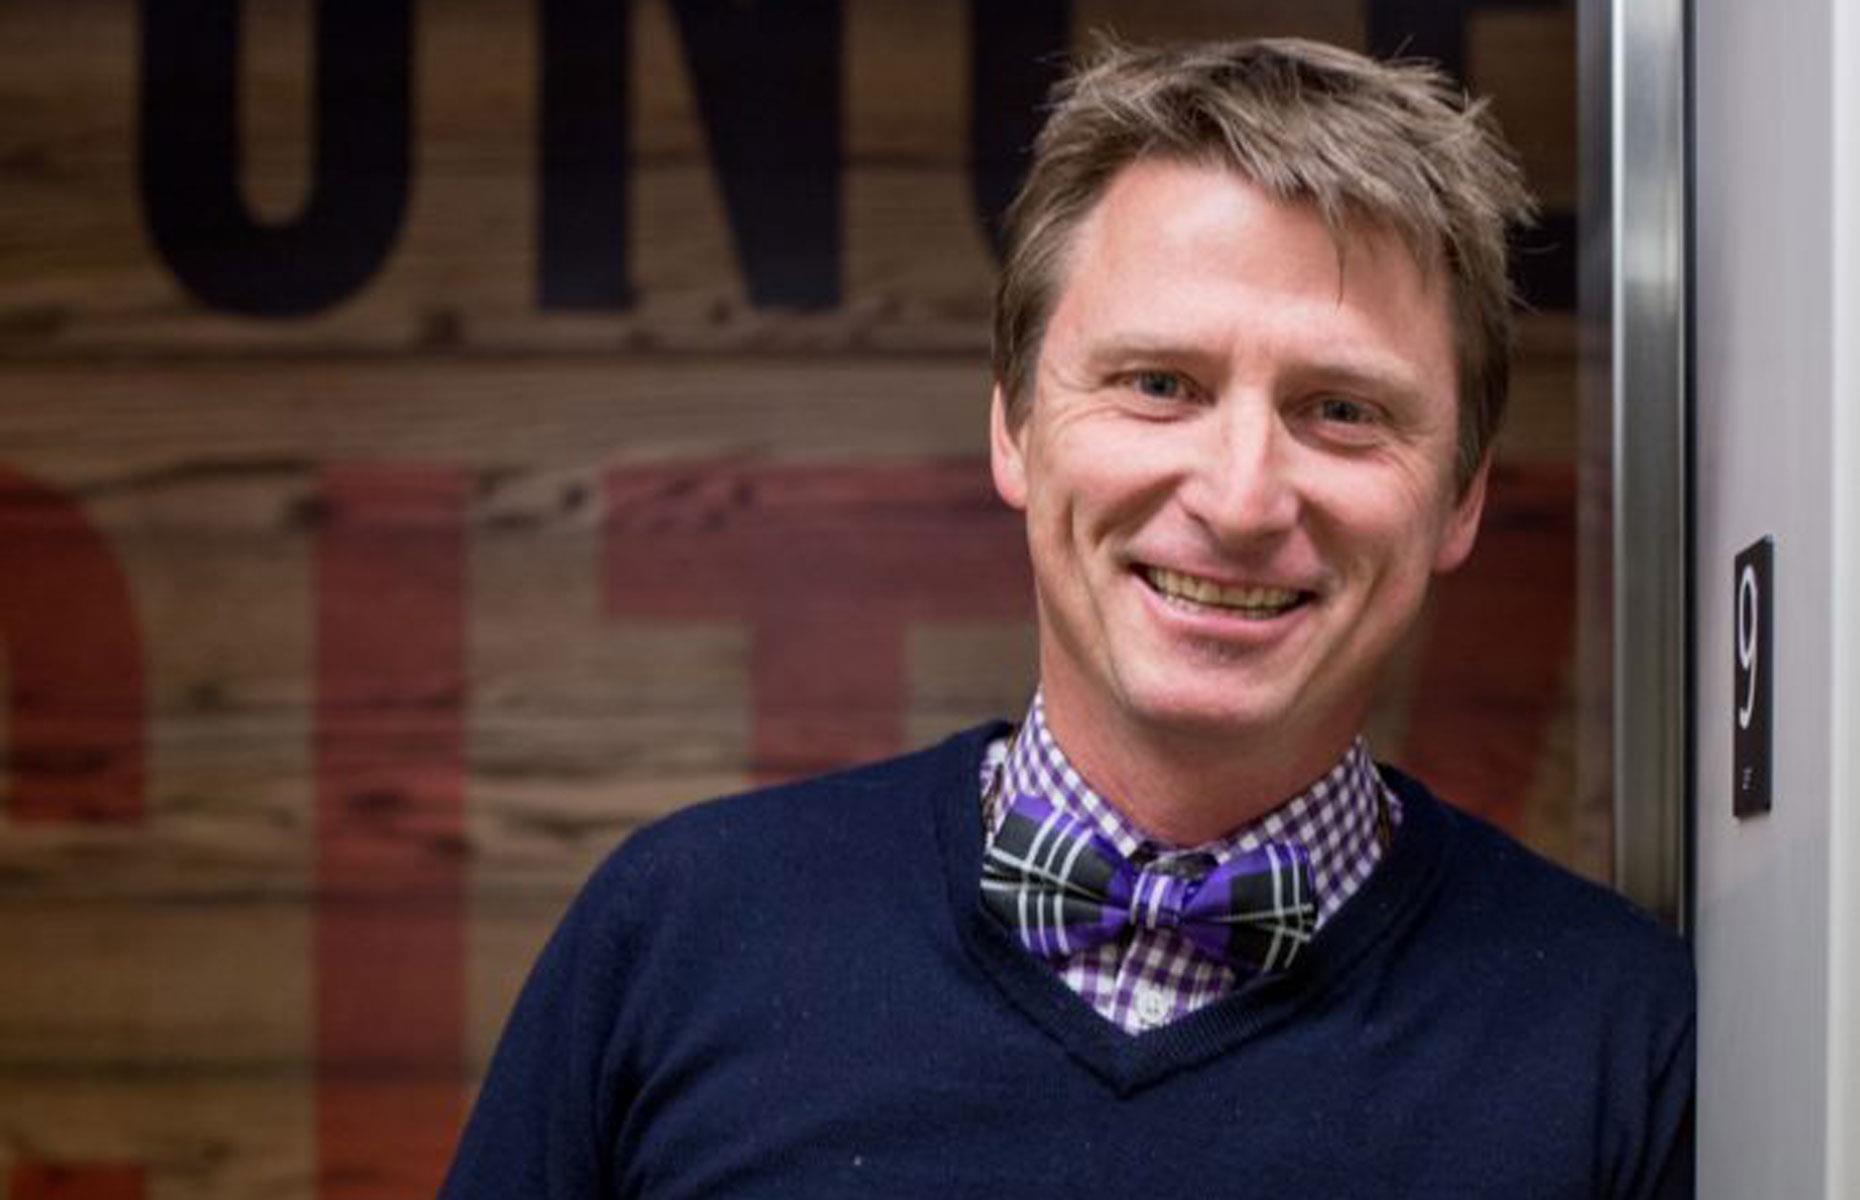 <p>The nephew of George H W Bush, Jonathan S Bush had the foresight in the late 1990s to found Athenahealth, which specializes in internet-based healthcare services and software.</p>  <p>Jonathan guided the firm through its IPO, international expansion, and more. However, he was pushed out by investors in 2018, shortly after allegations of domestic abuse against his ex-wife surfaced.</p>